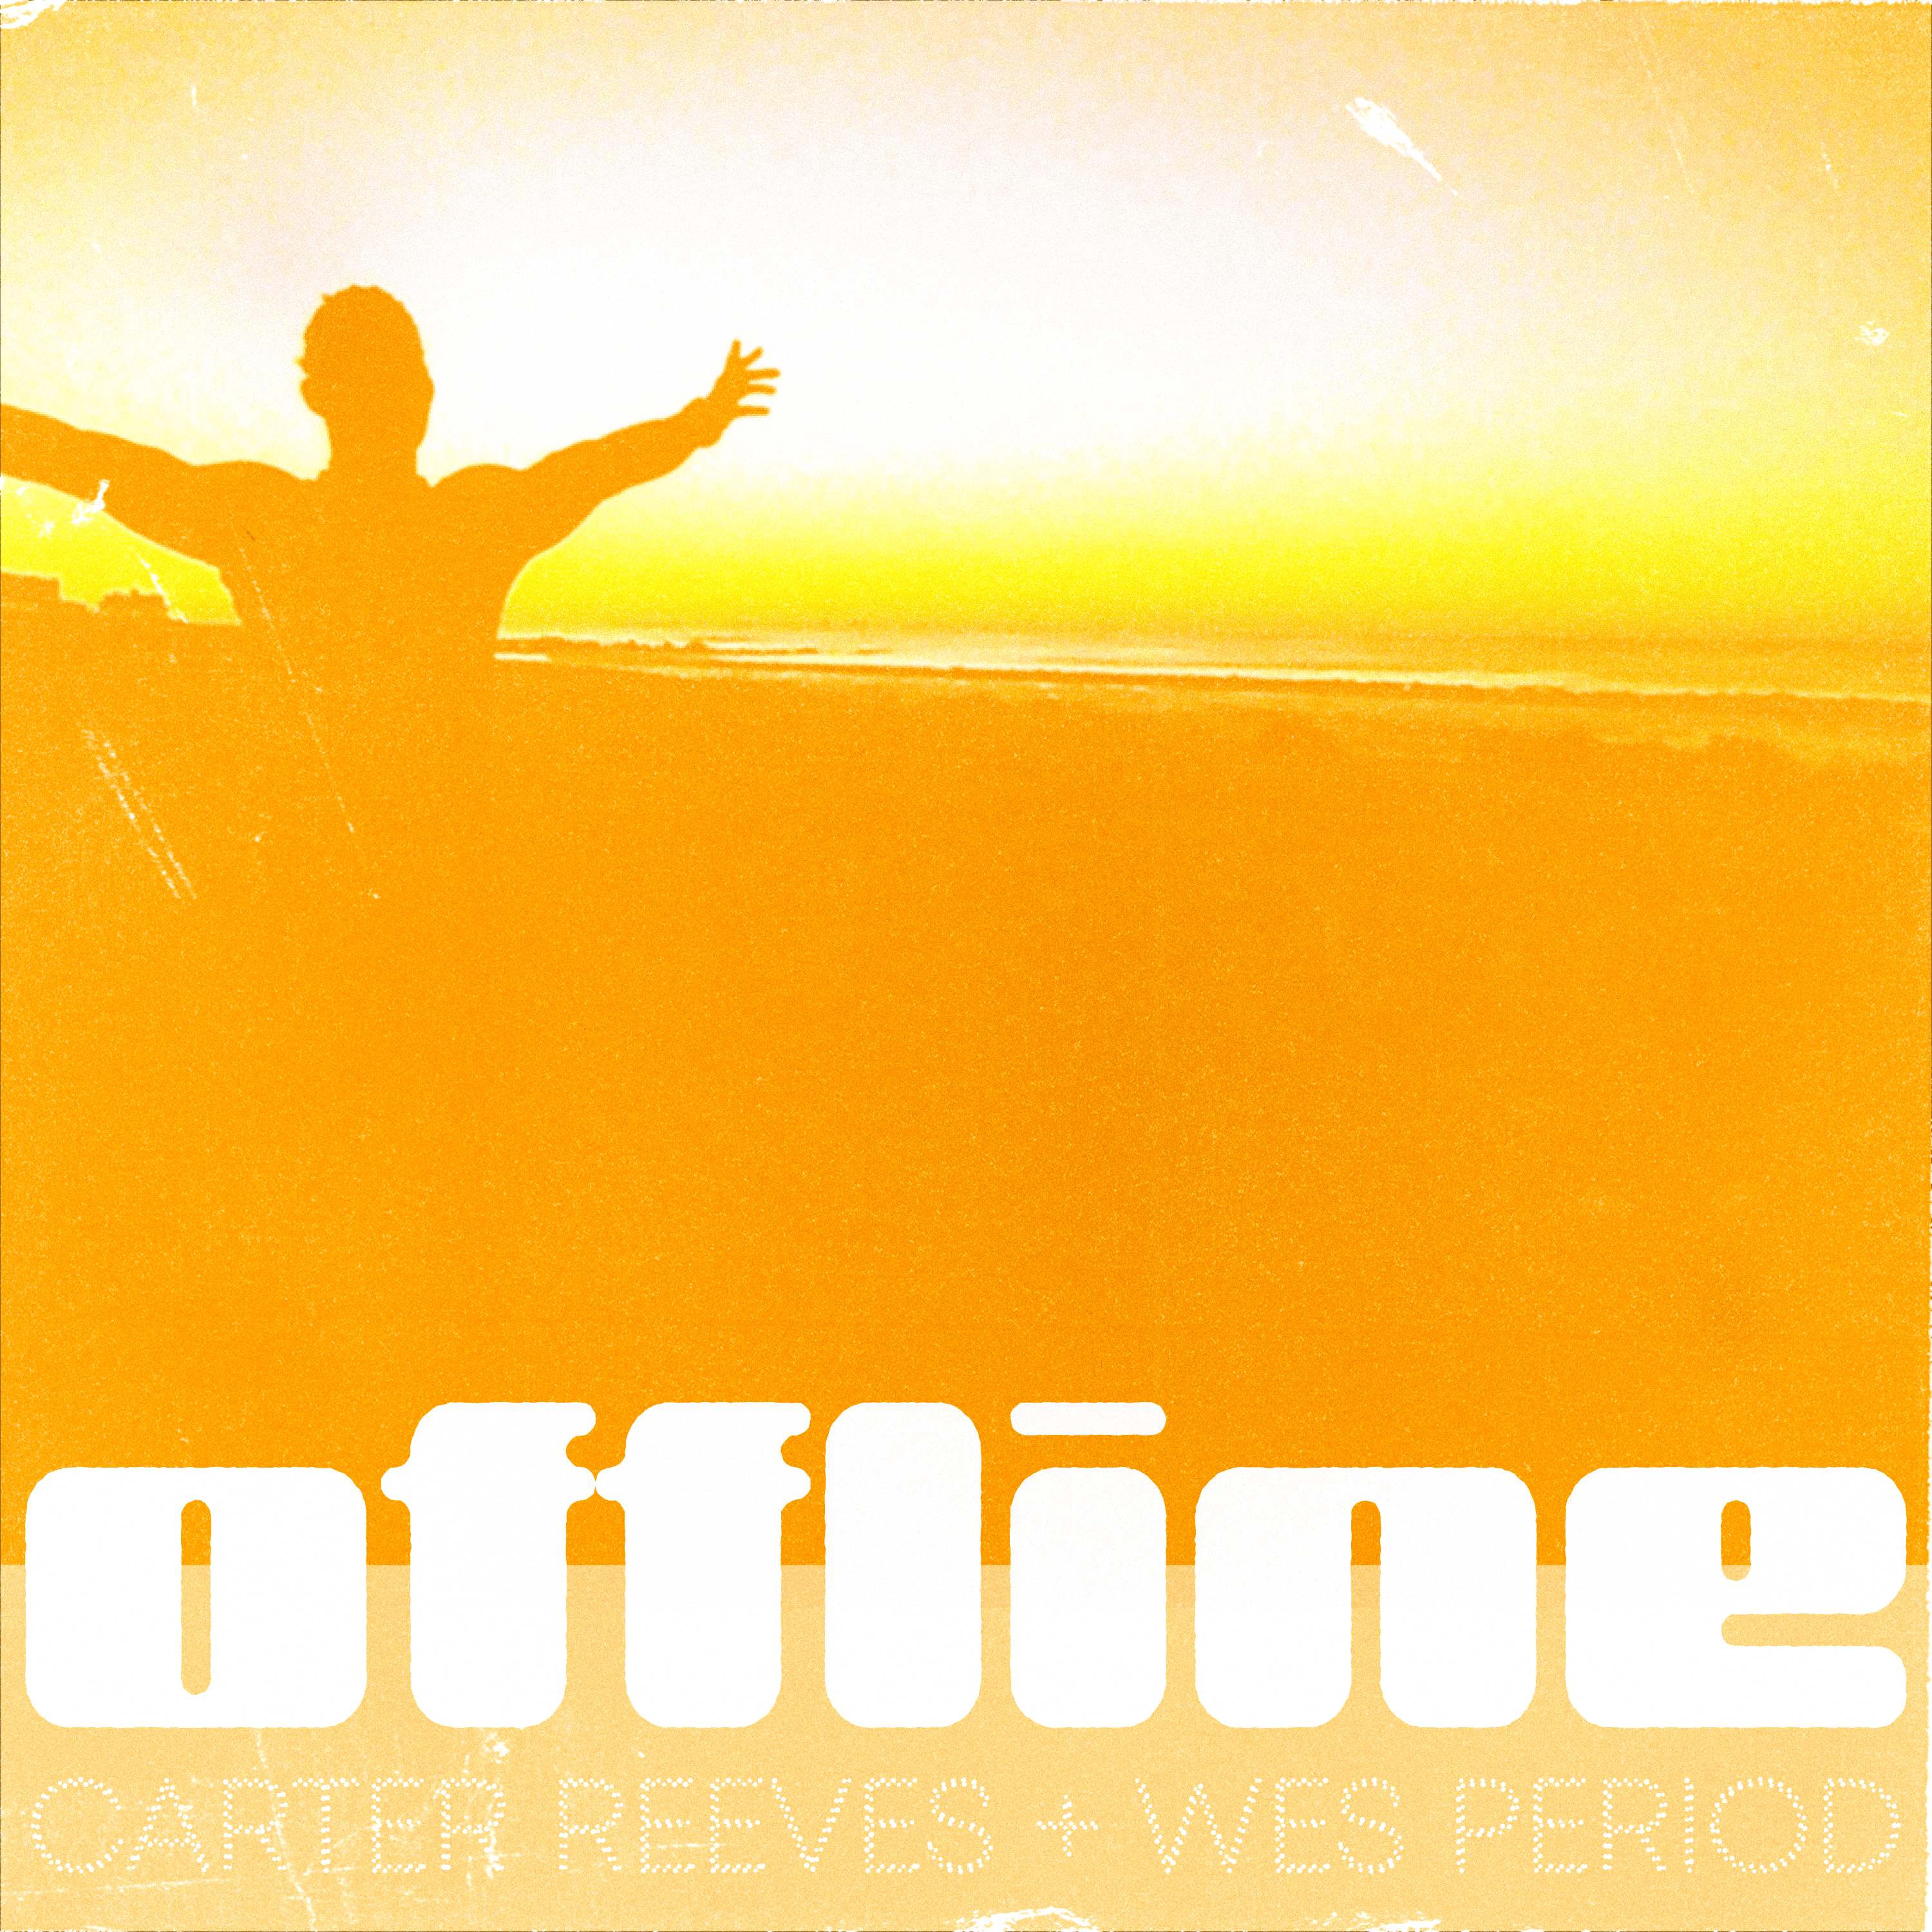 Cover art for Carter Reeves's song: Offline feat. Wes Period